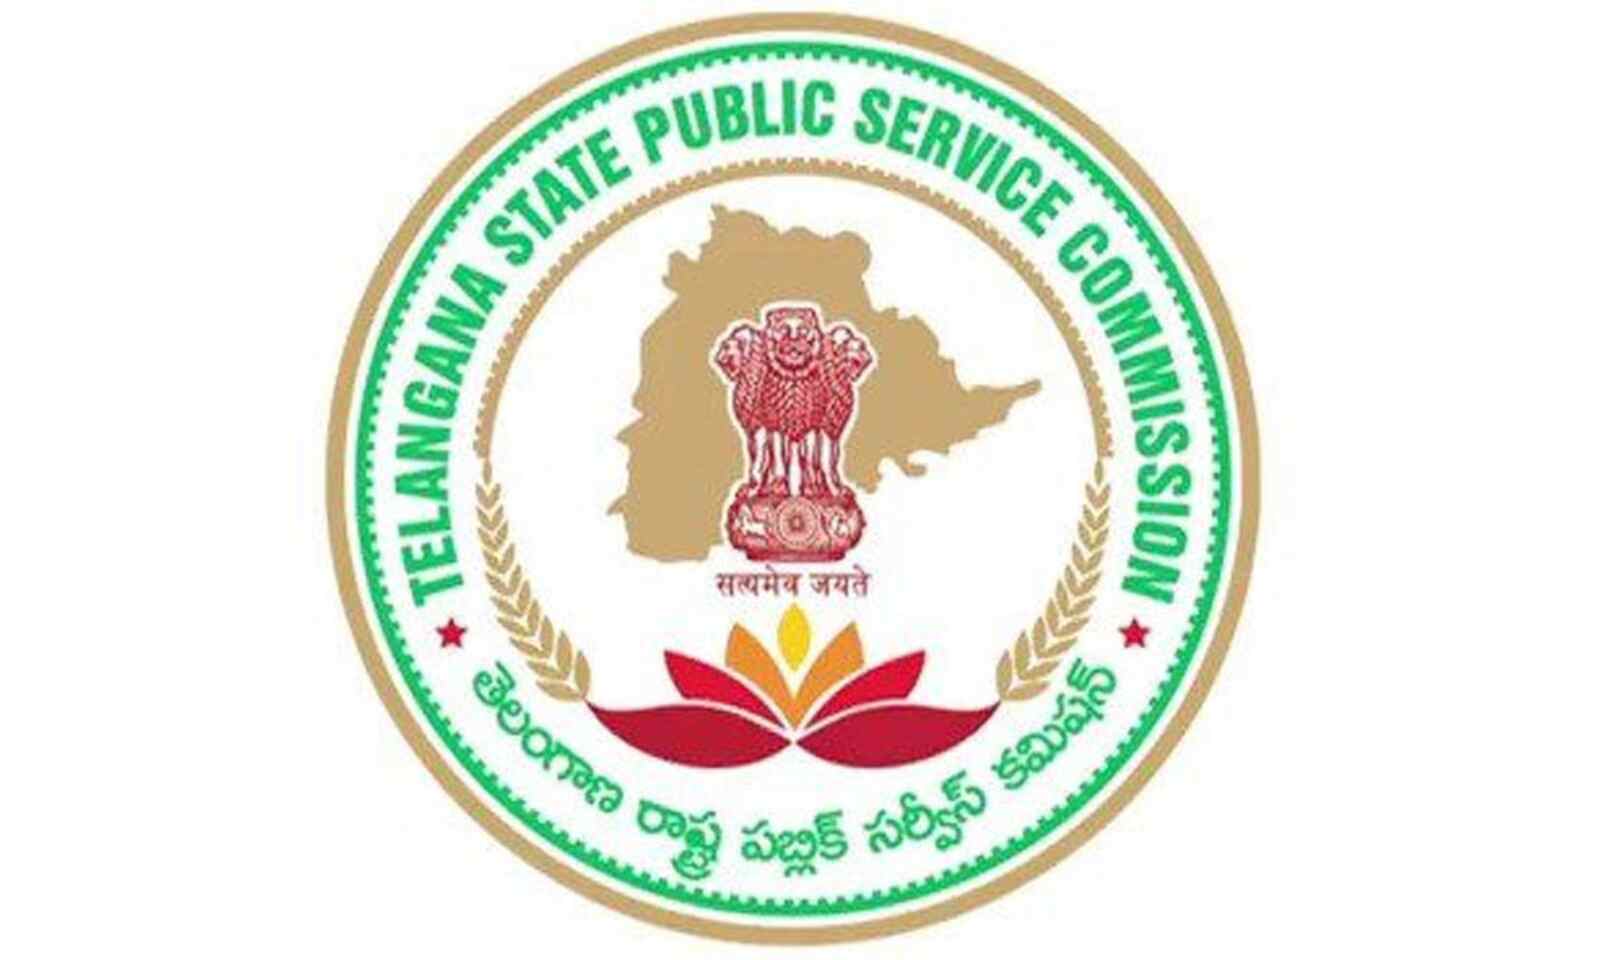 Telangana: No minimum qualifying marks for getting shortlisted for group -1